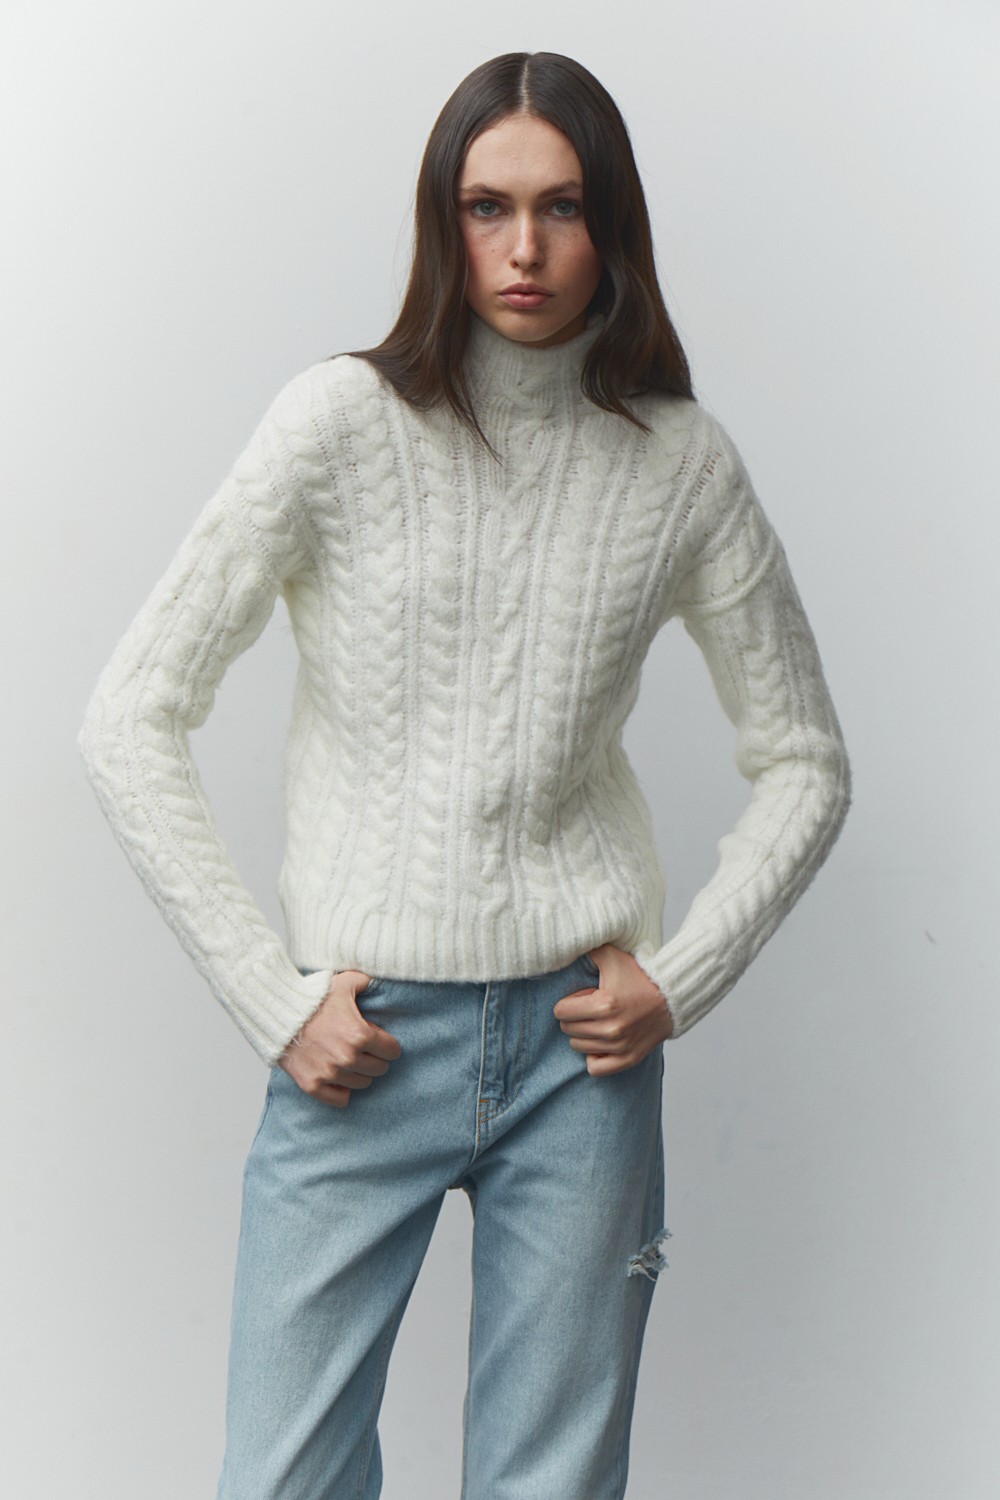 Knitted braid sweater